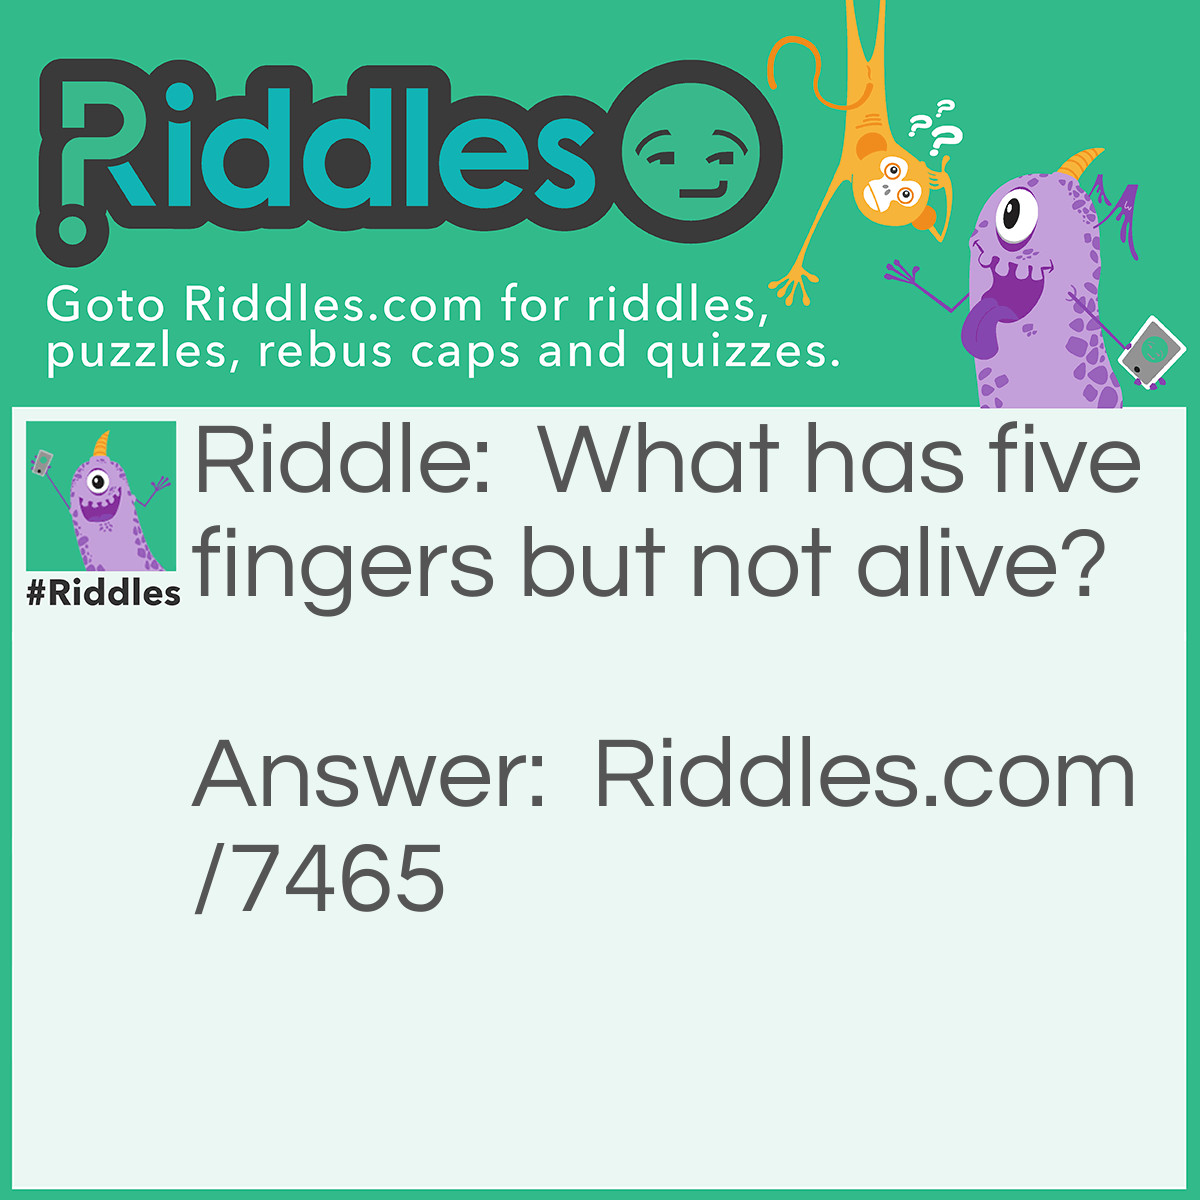 Riddle: What has five fingers but not alive? Answer: A glove.